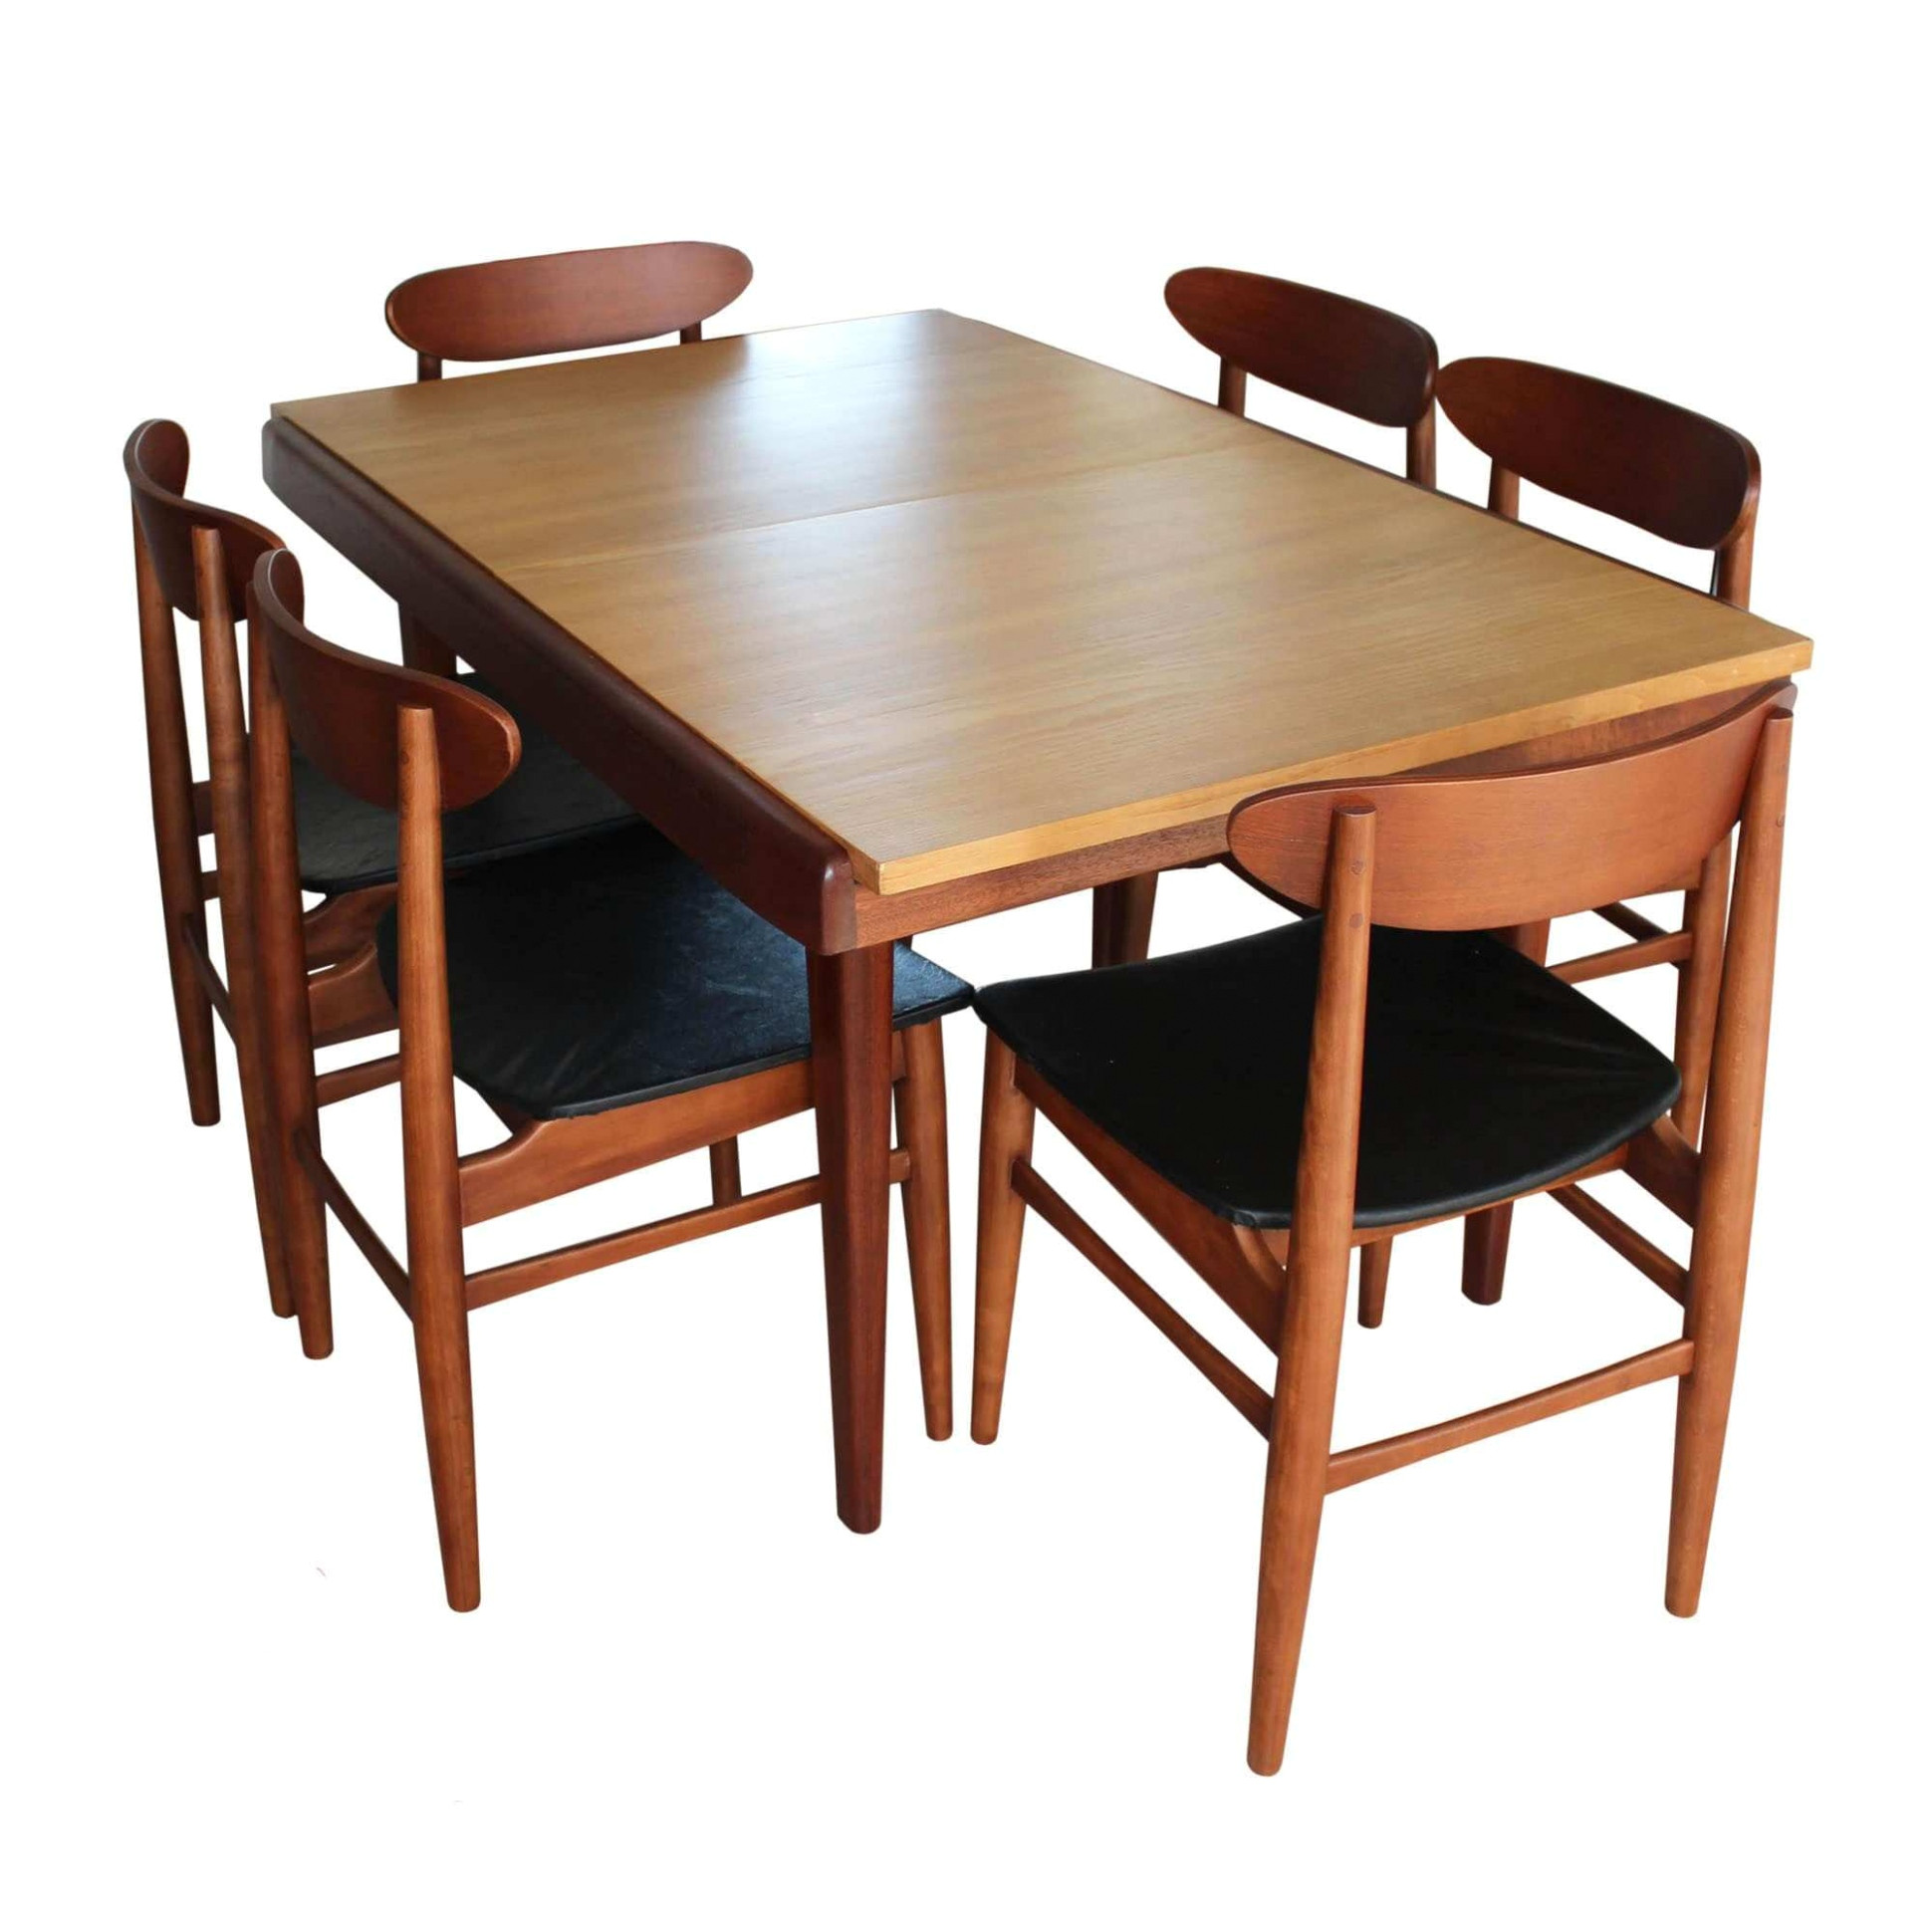 impressive mid century dining room with exquisite wooden kitchen table and chair contemporary mid century od